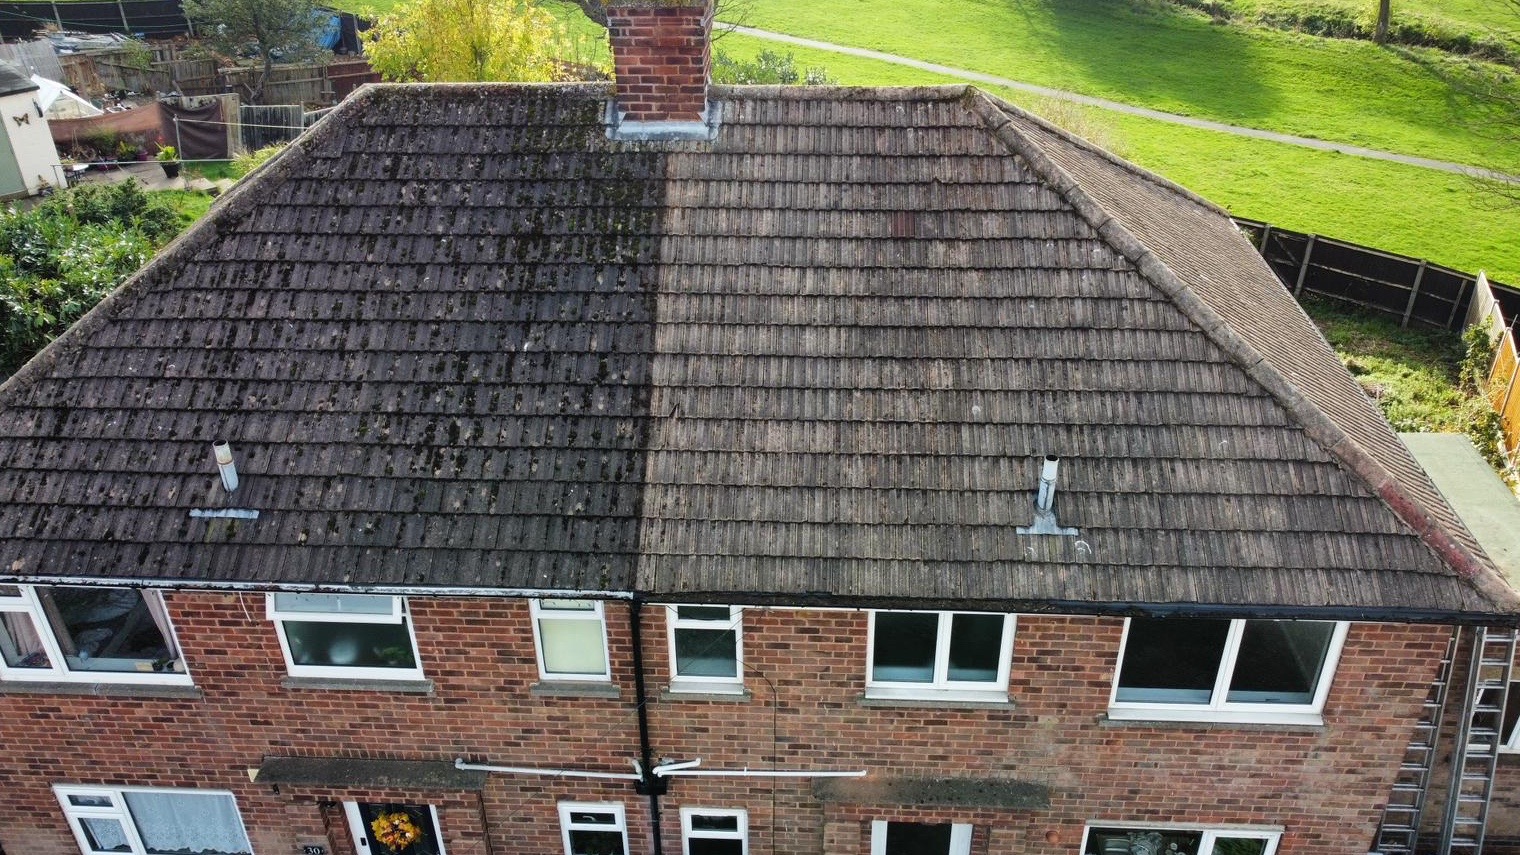 Nuneaton Roof & Gutter Cleaner Offers Home Service Appointments For Summer 2023